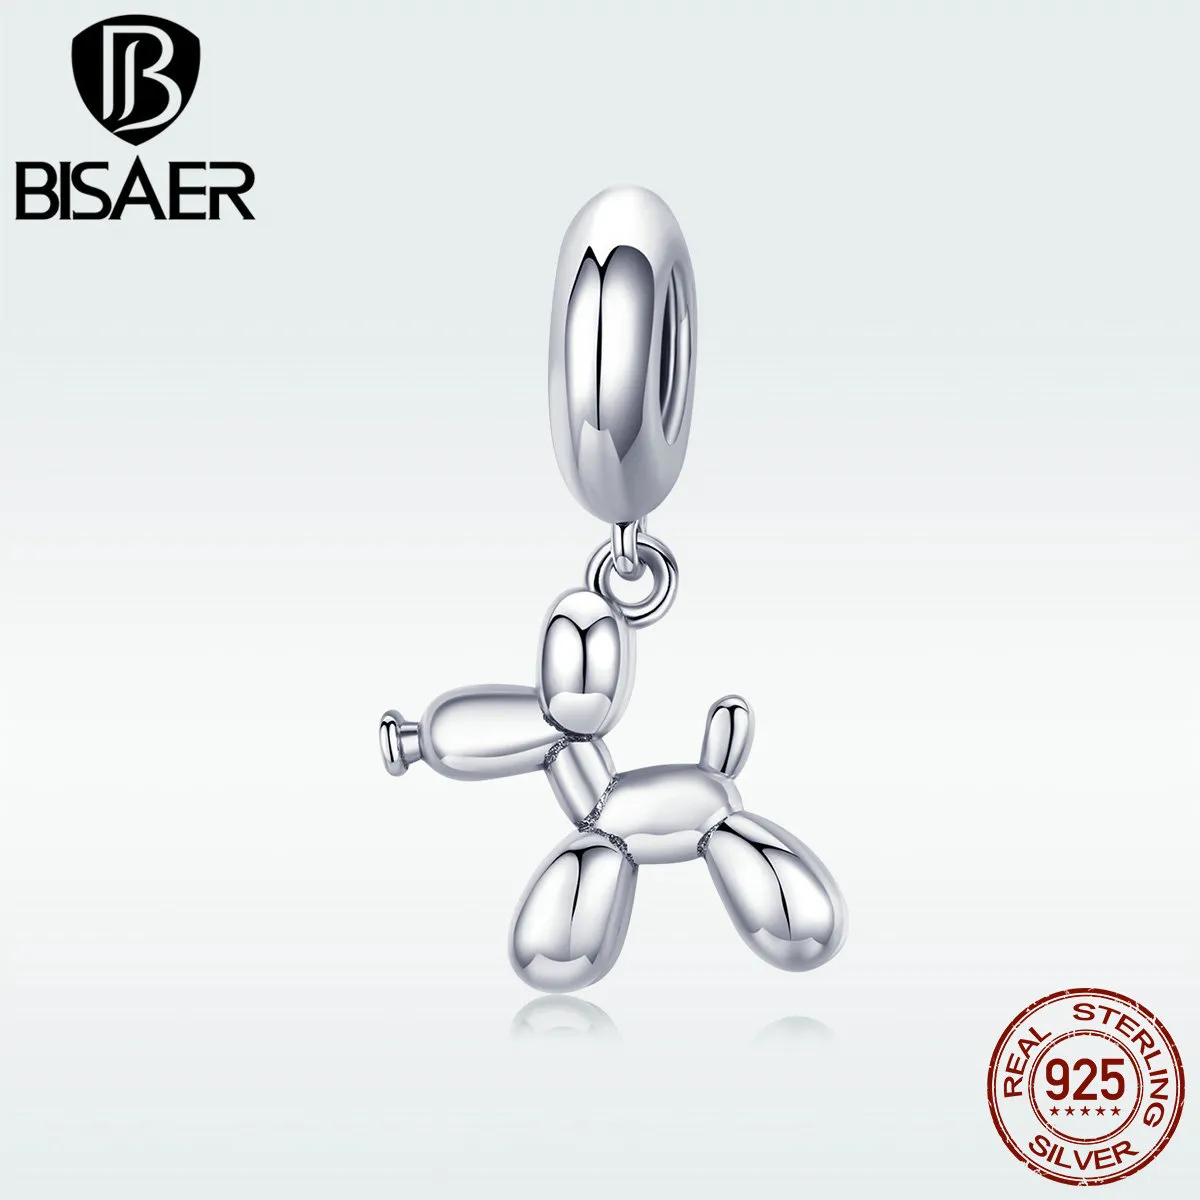 Bisaer 925 Sterling Silver Balloon Dog Tools Charms Puppet Dog Beads Fit Bracet Beads for Silver 925 Jewelry Making ECC981 Q0225323H